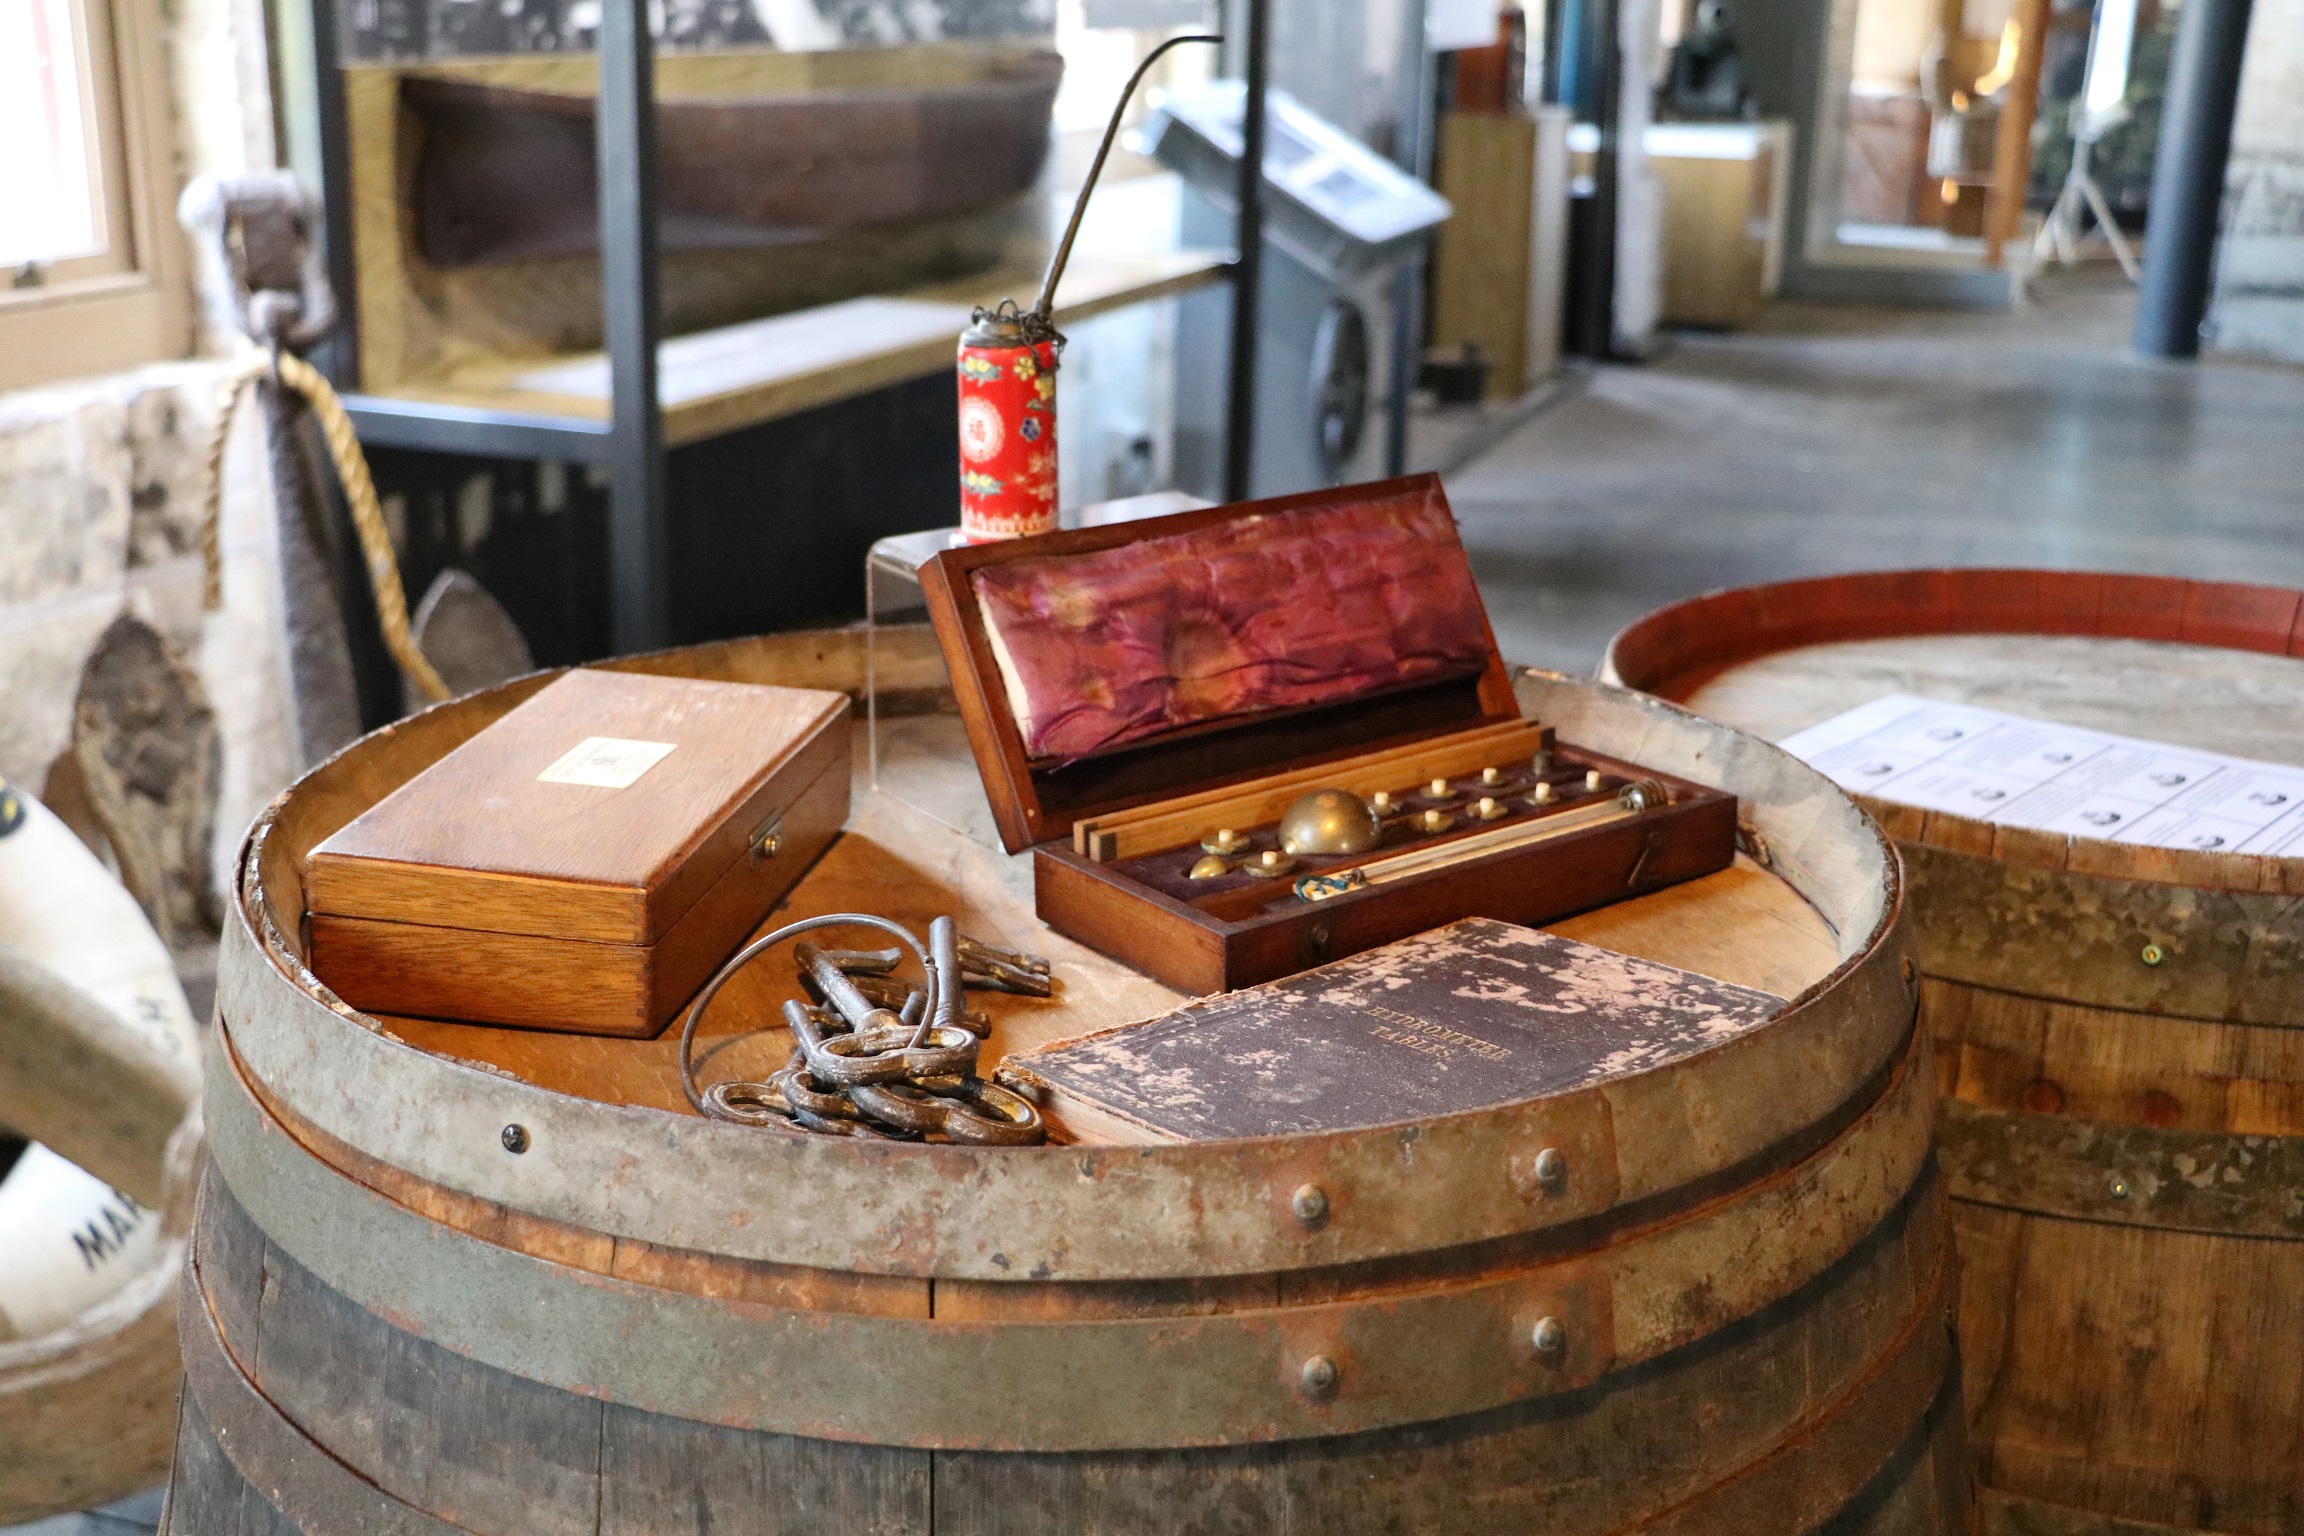 Artefacts on display on a barrel at the Bond Store